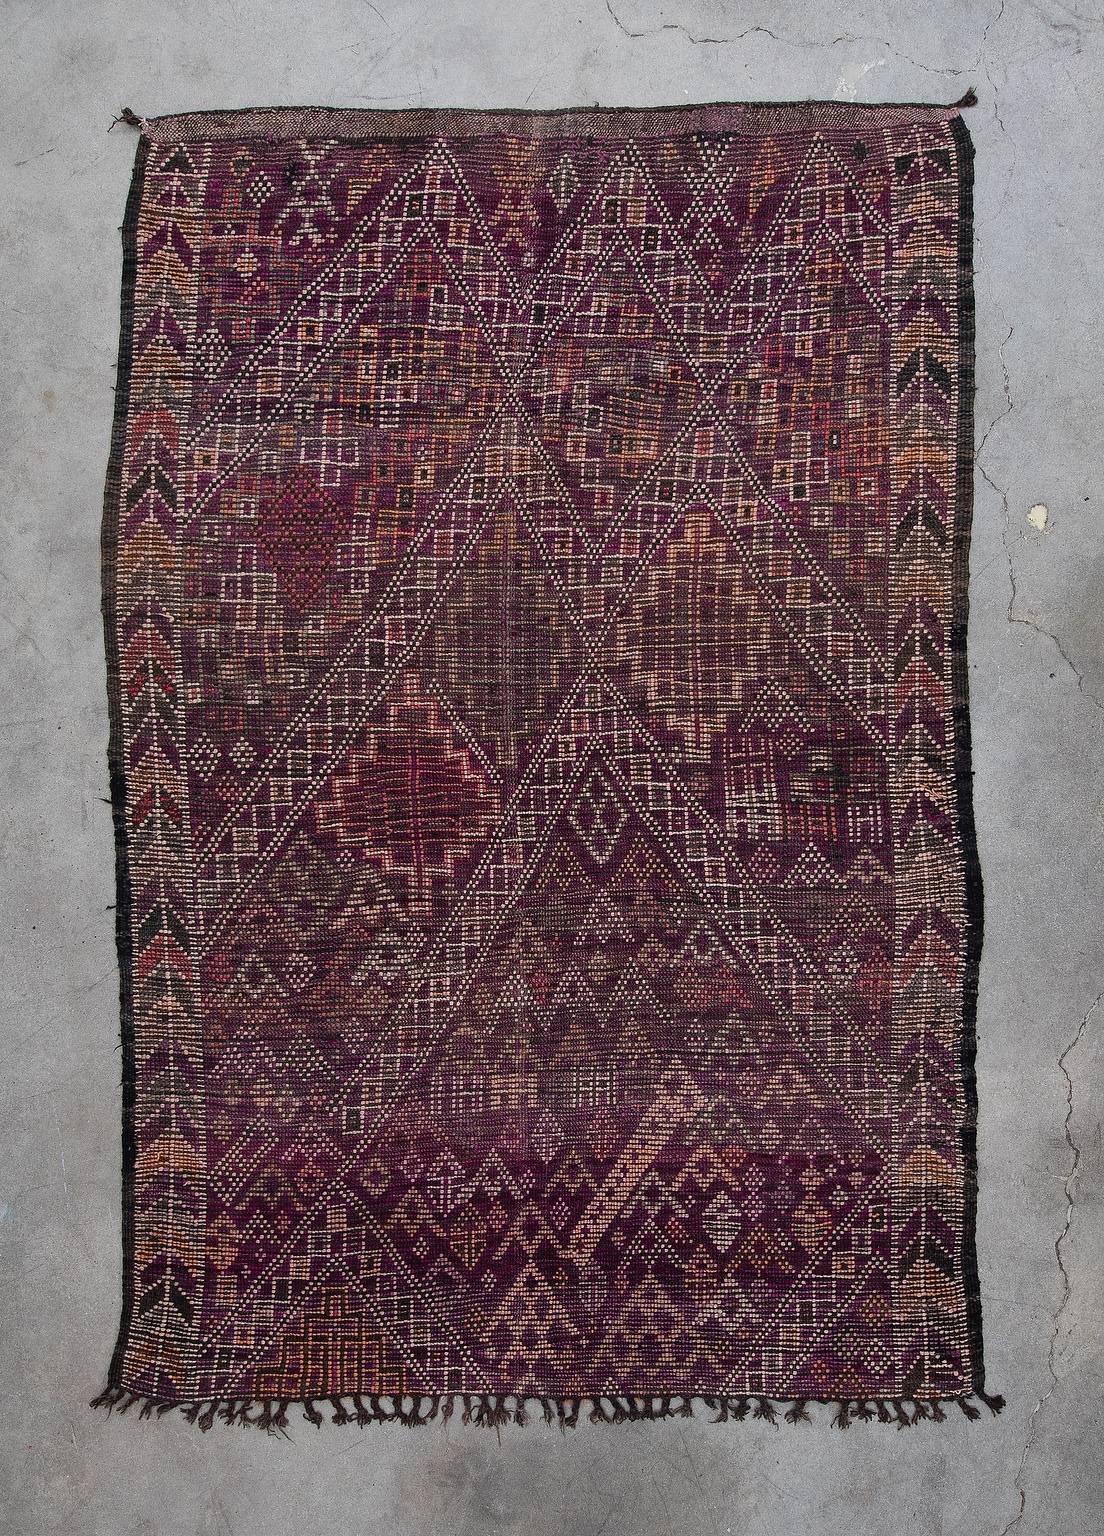 The Beni M'Guild Tribe yields from the middle Atlas region of Morocco. Their rugs tend to be very plush, woven to provide warmth and comfort during the winter months. Beni M'Guild rugs feature a well-known composition of diamonds in the